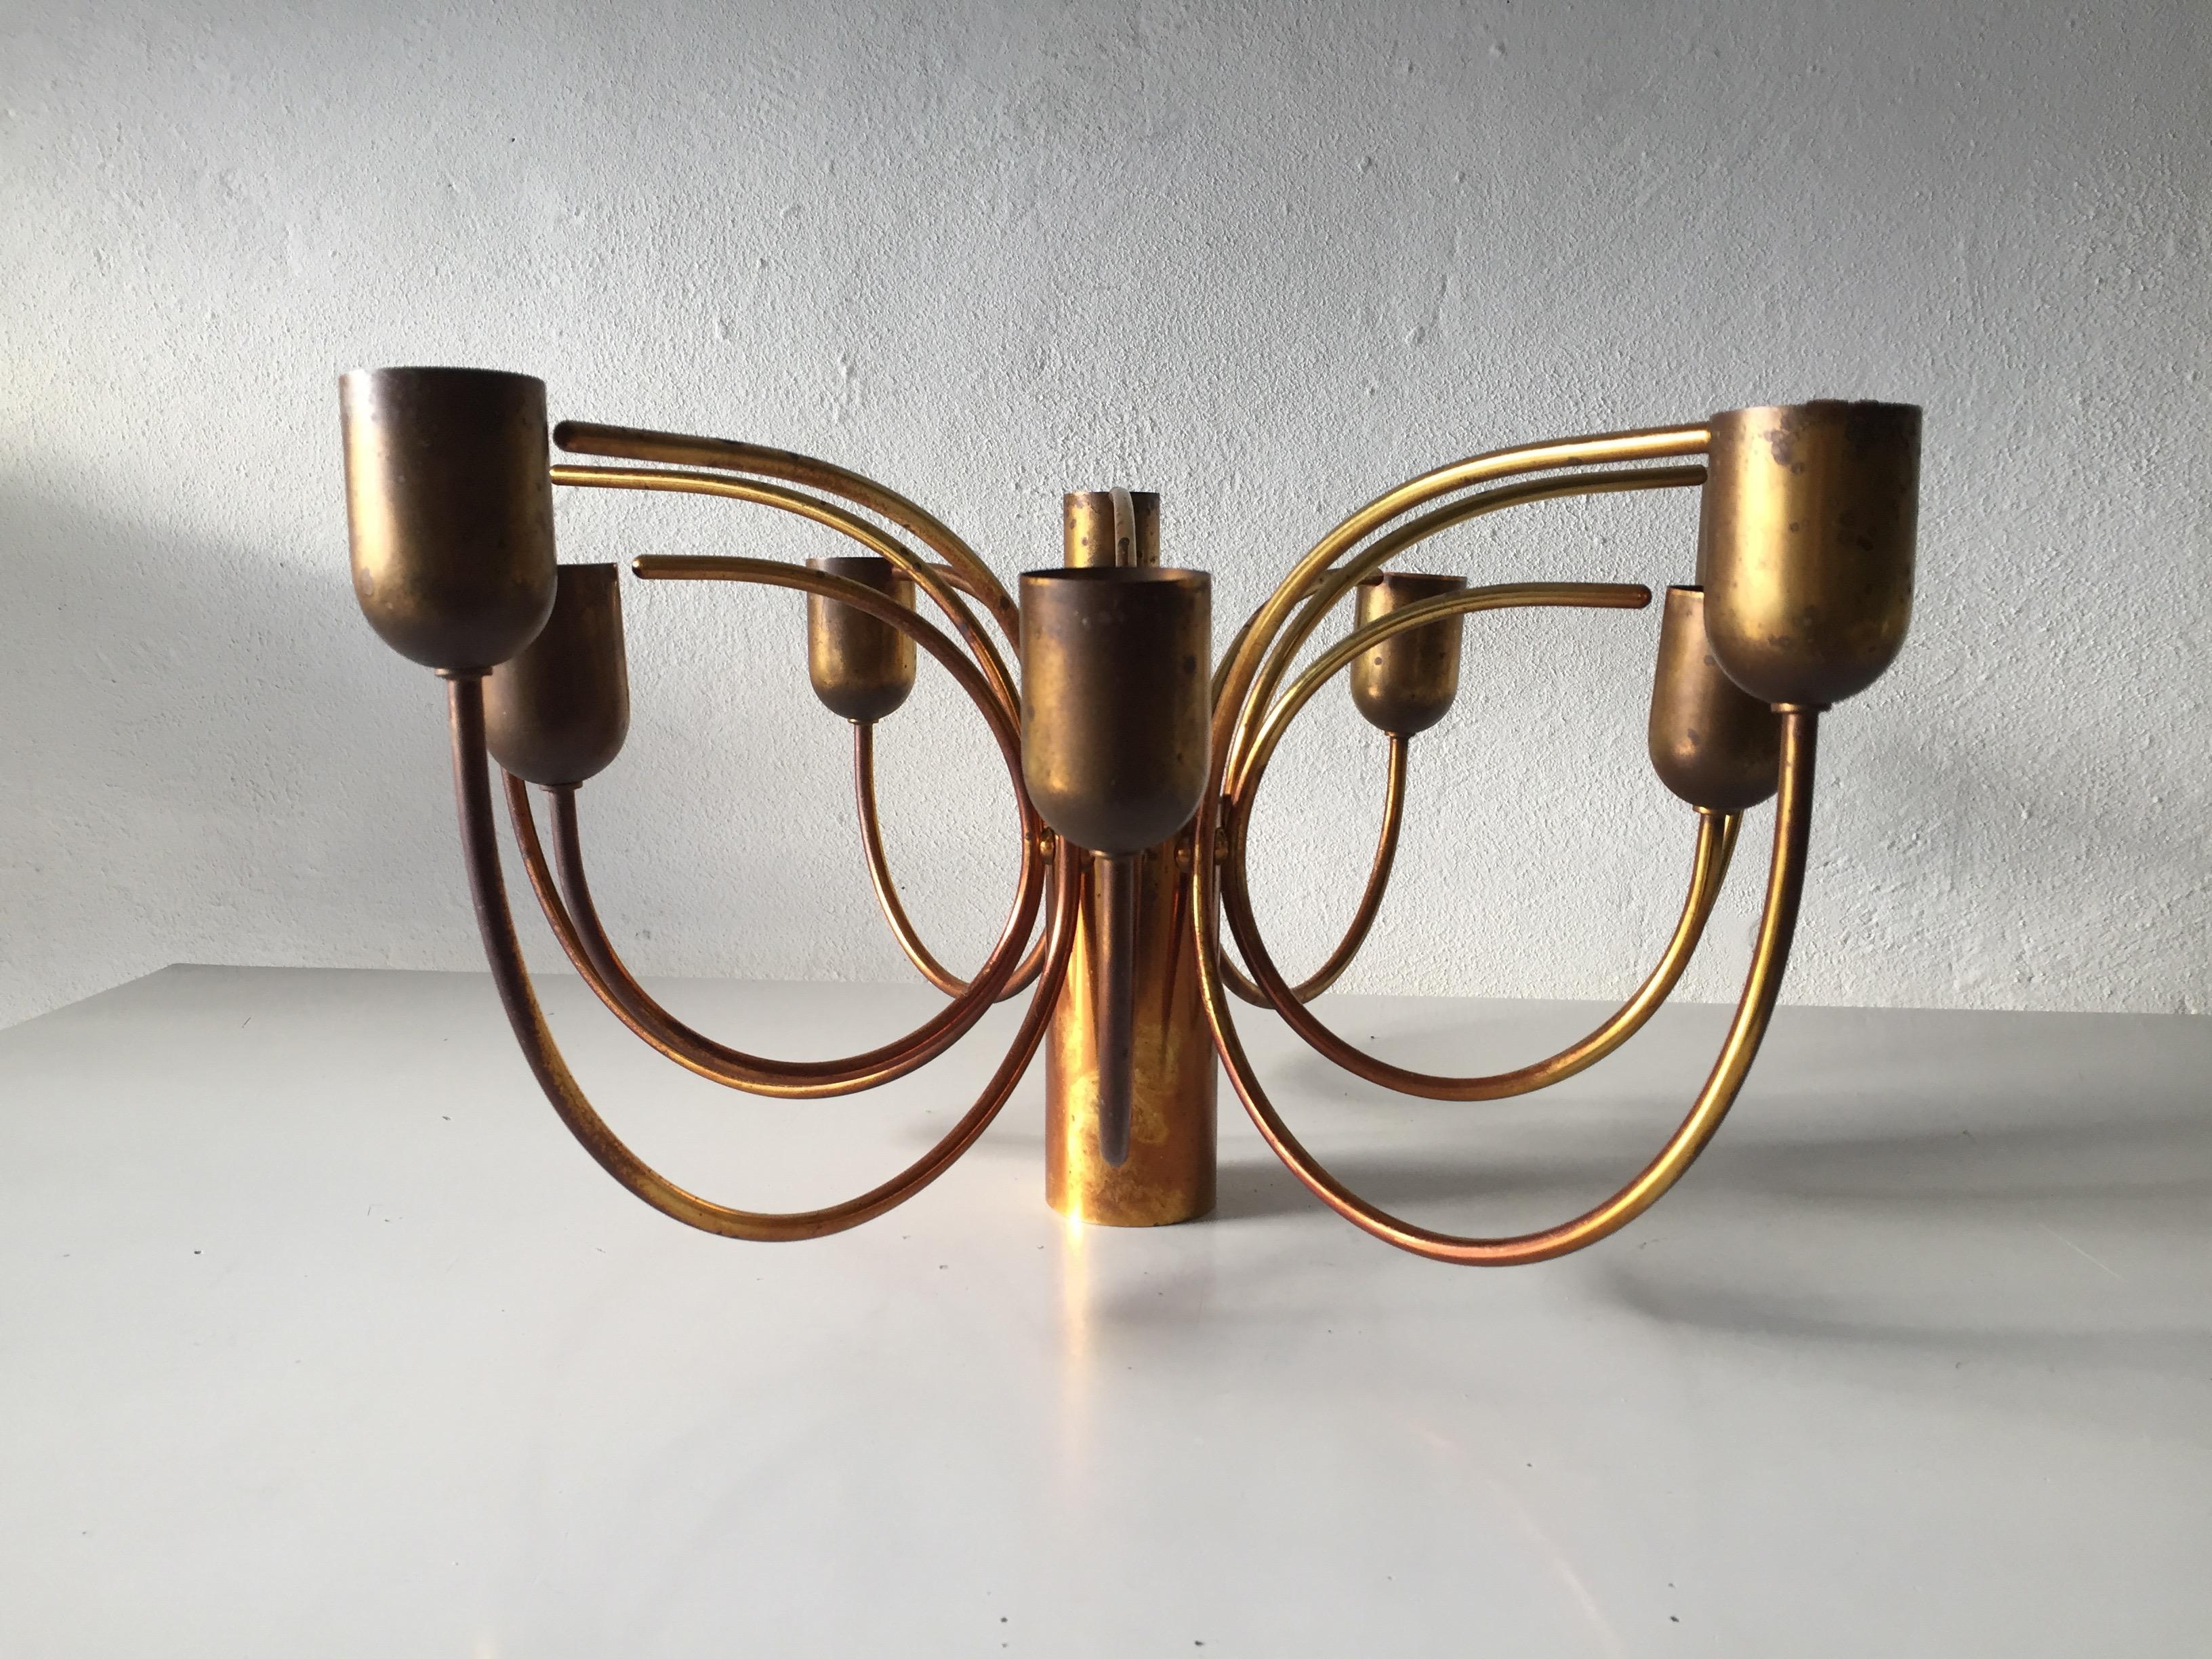 Rare 10 Arc Shaped Arms Full Brass Chandelier by Cosack Leuchten, 1970s Germany For Sale 3